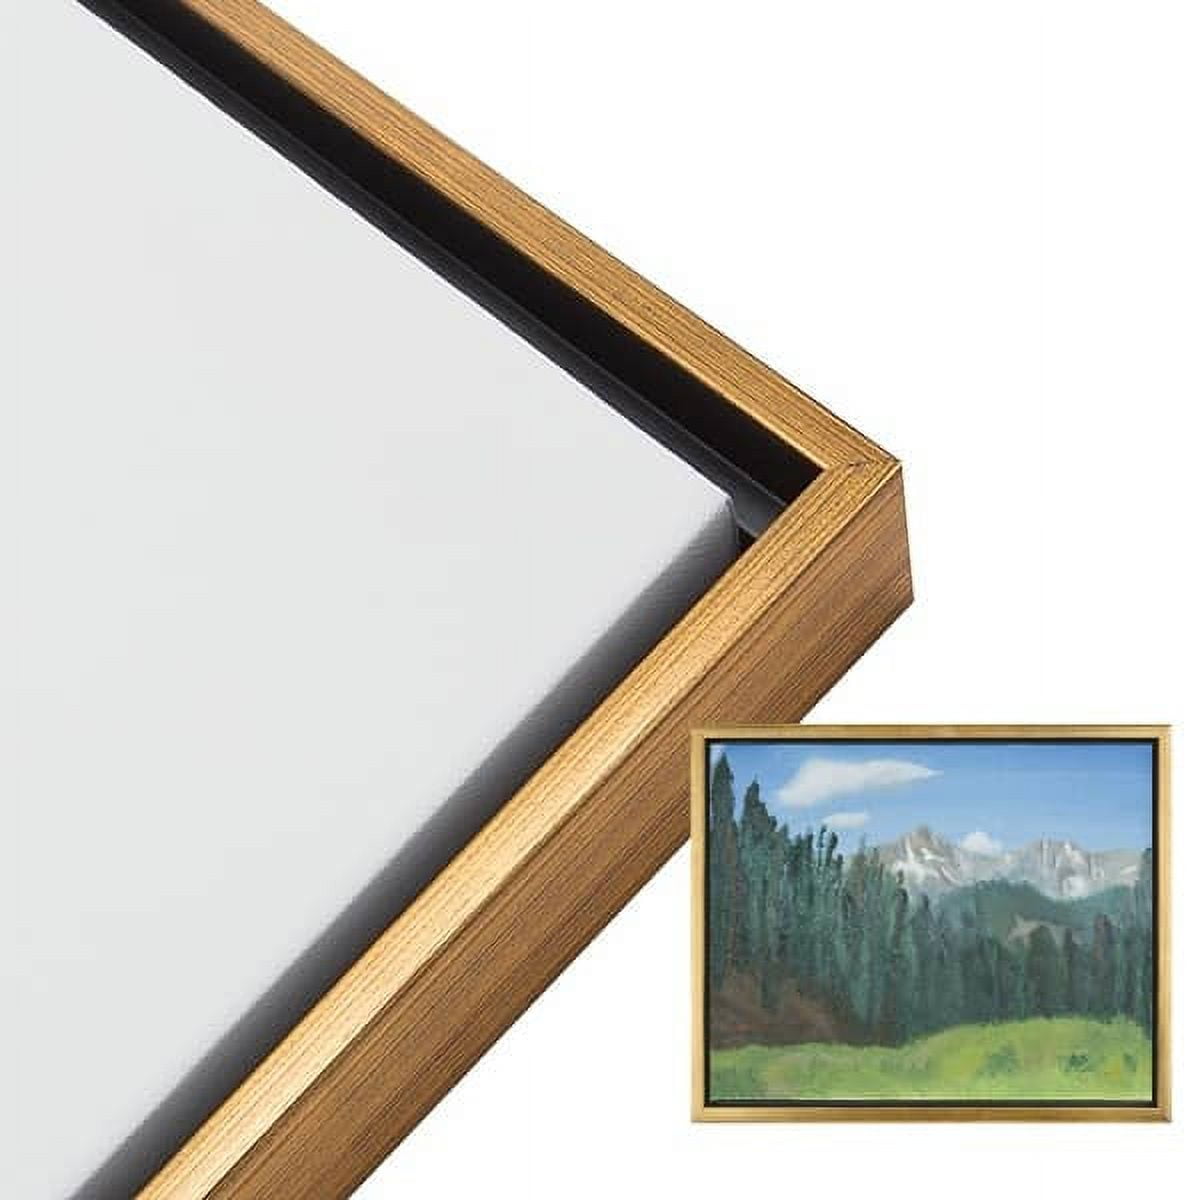 Illusions Floater Frame, 12x12 White - 3/4 Deep